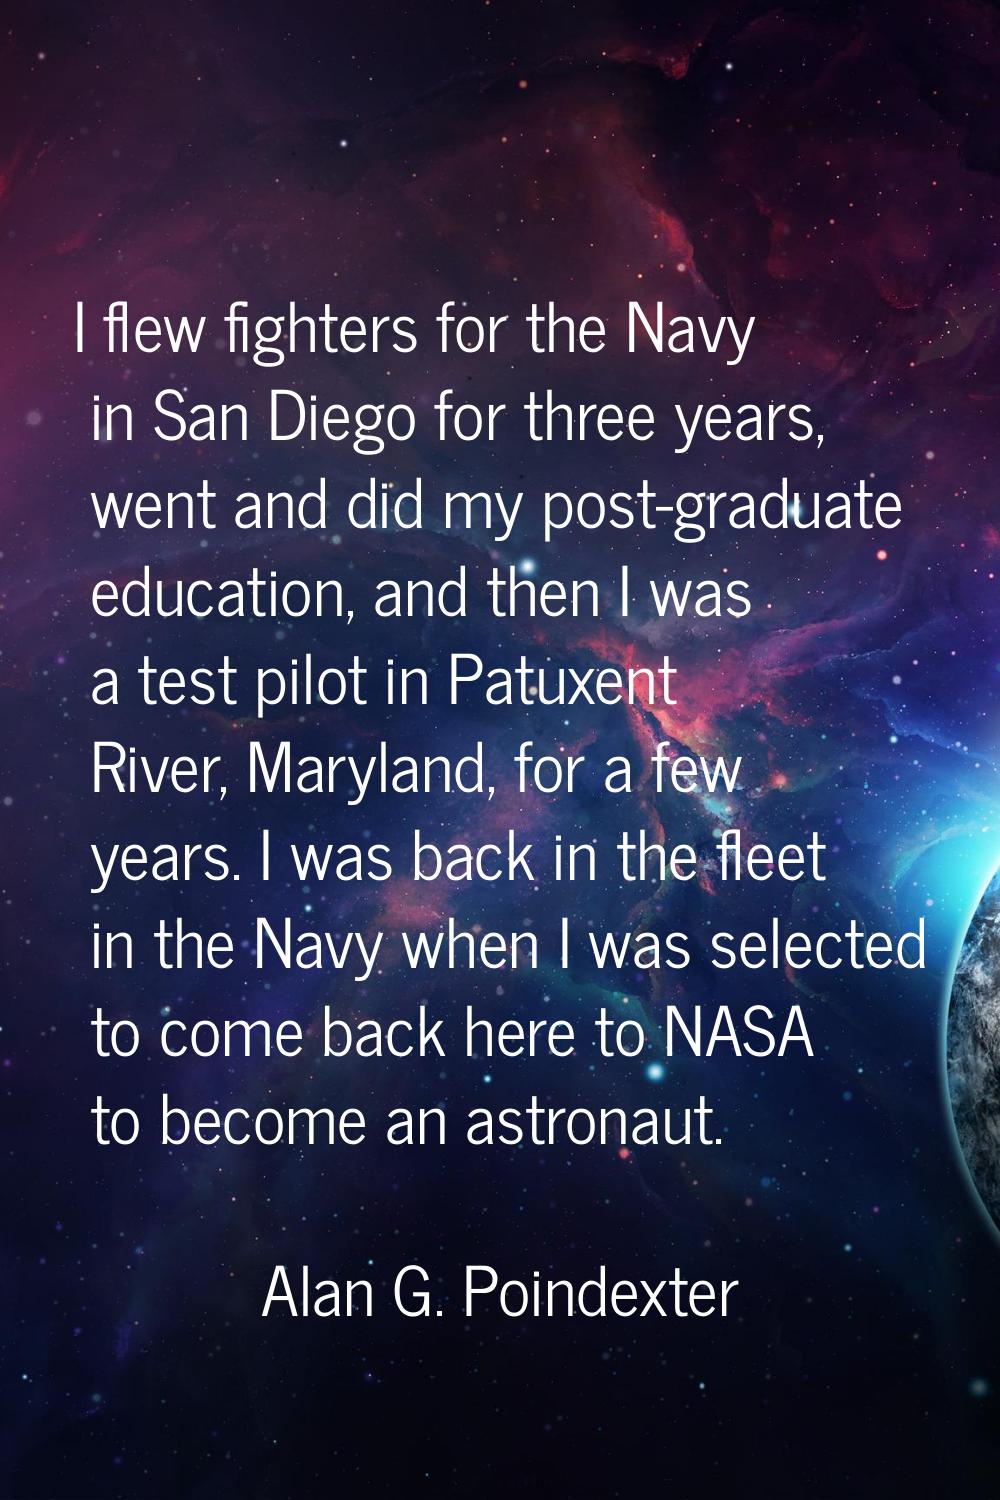 I flew fighters for the Navy in San Diego for three years, went and did my post-graduate education,